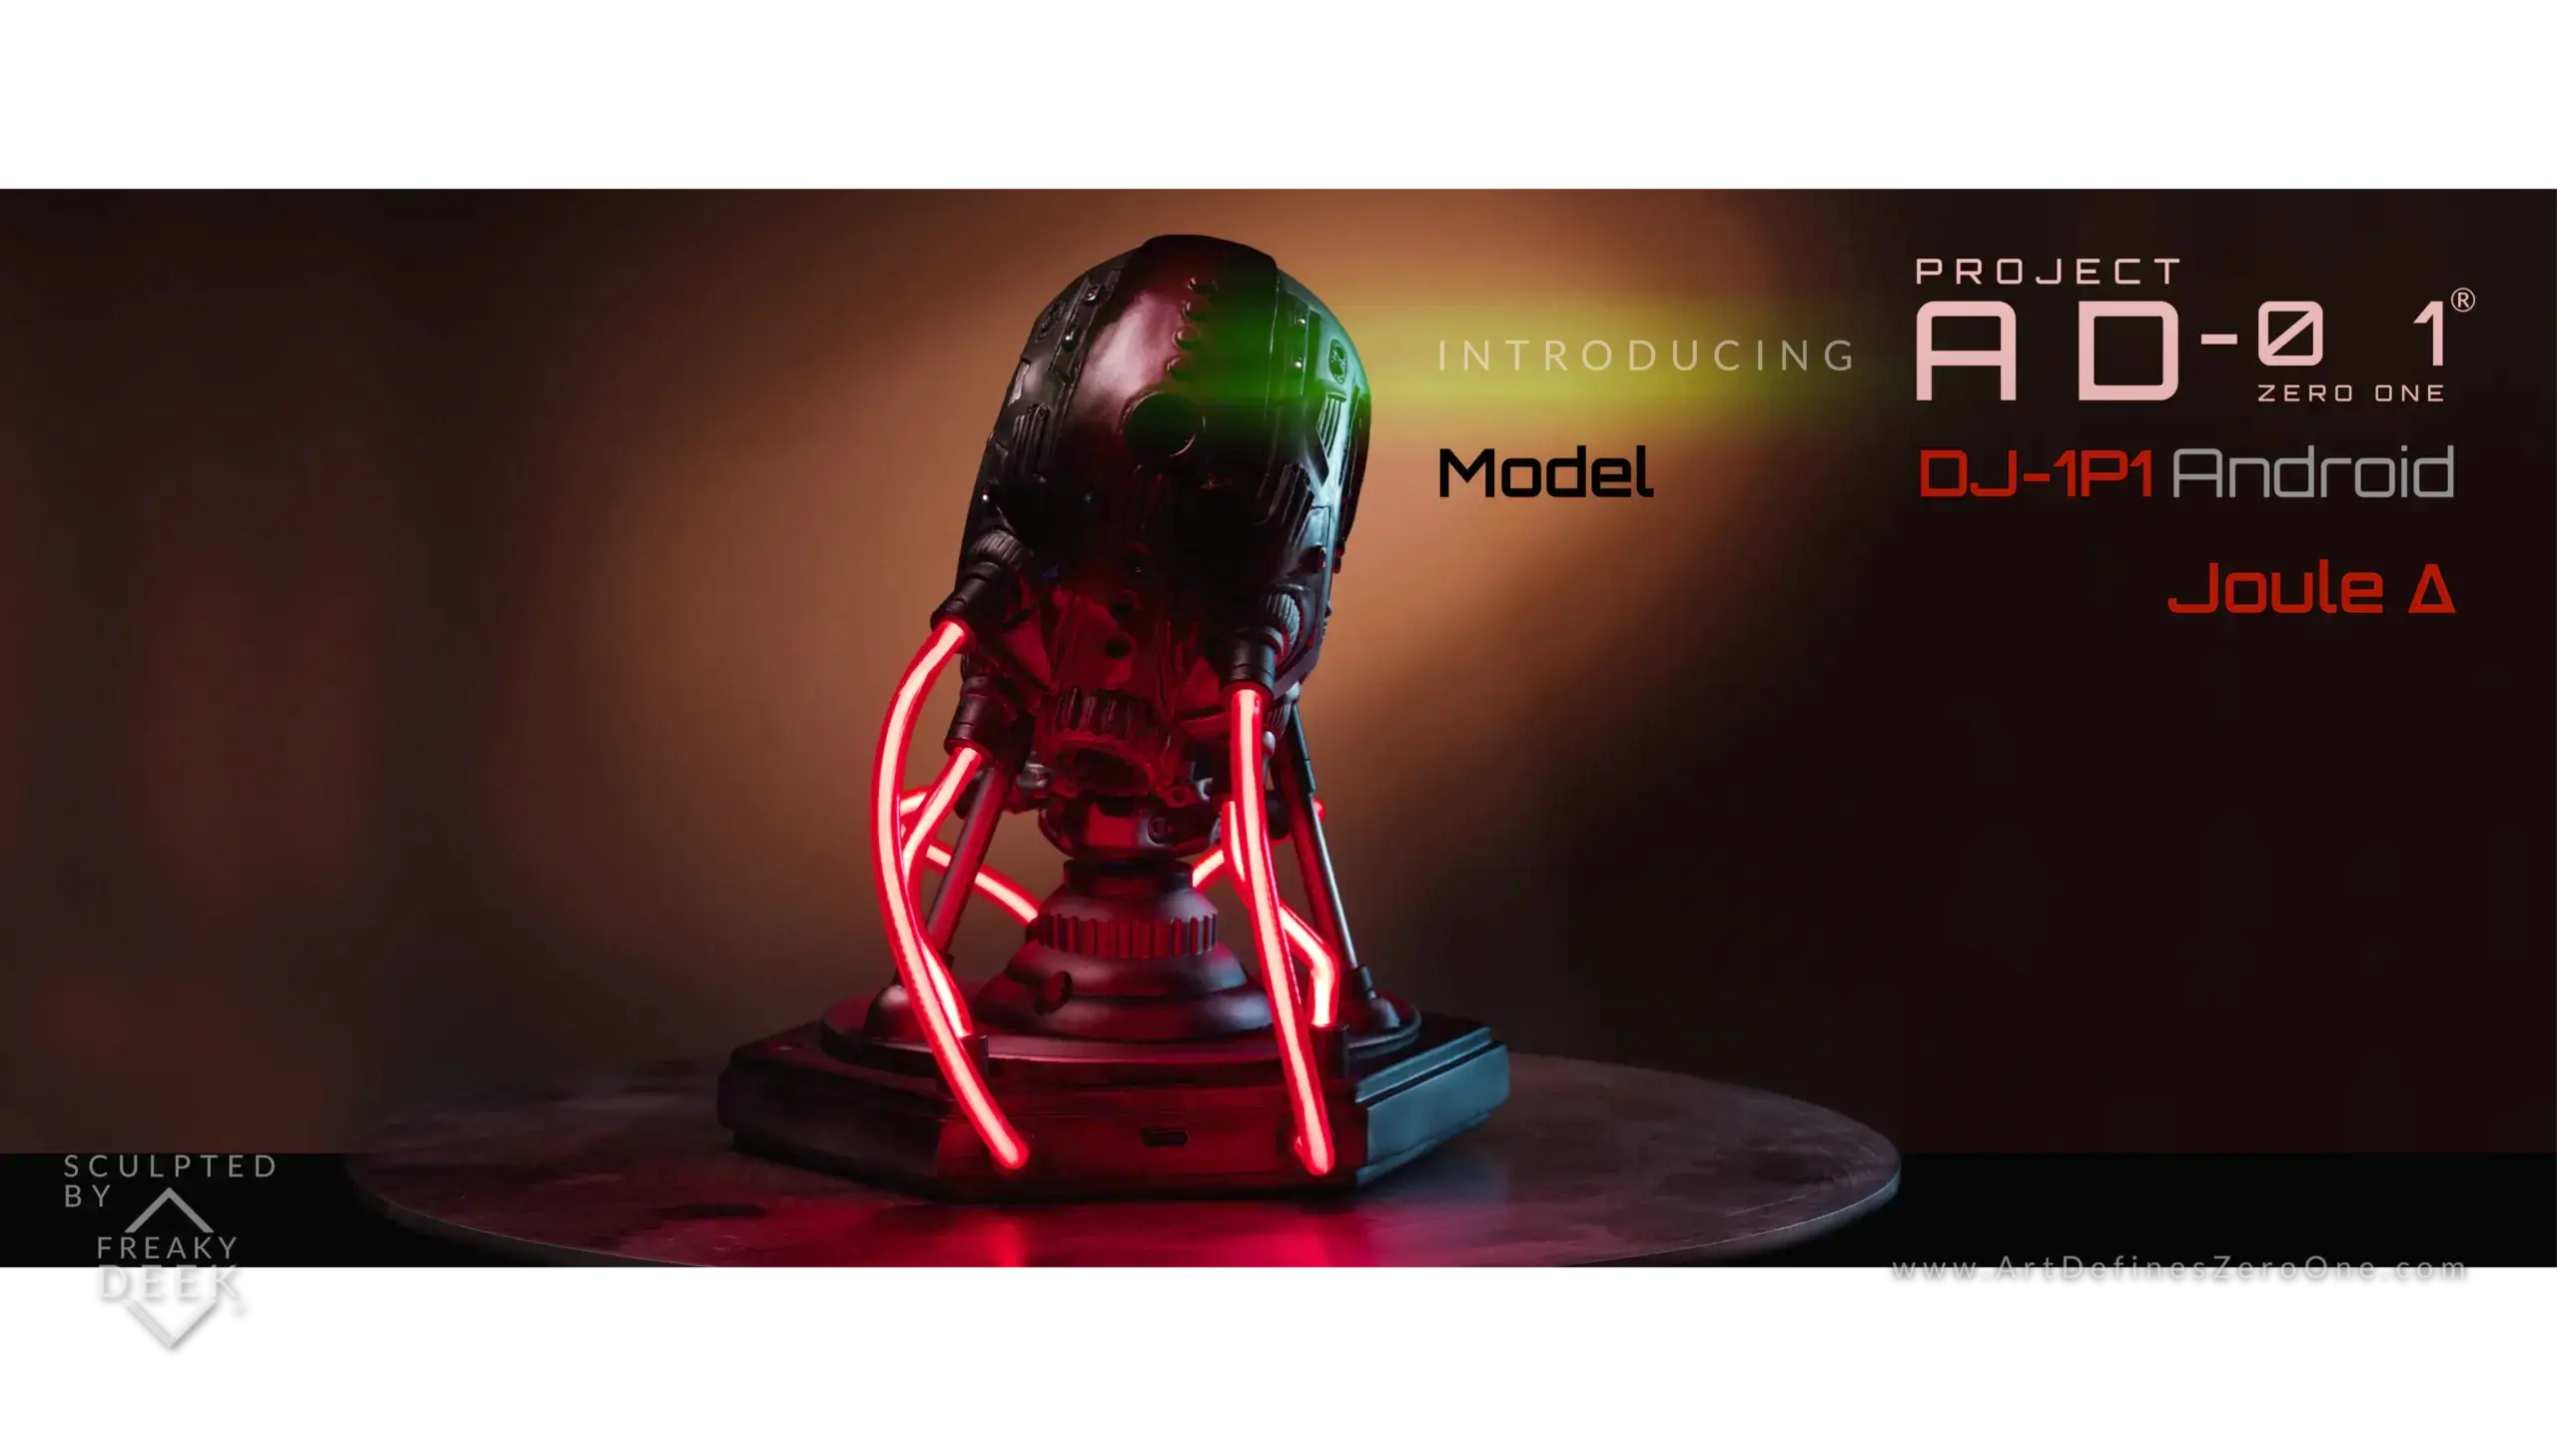 Project AD-01 handmade android sculpture Joule with red LED light back view